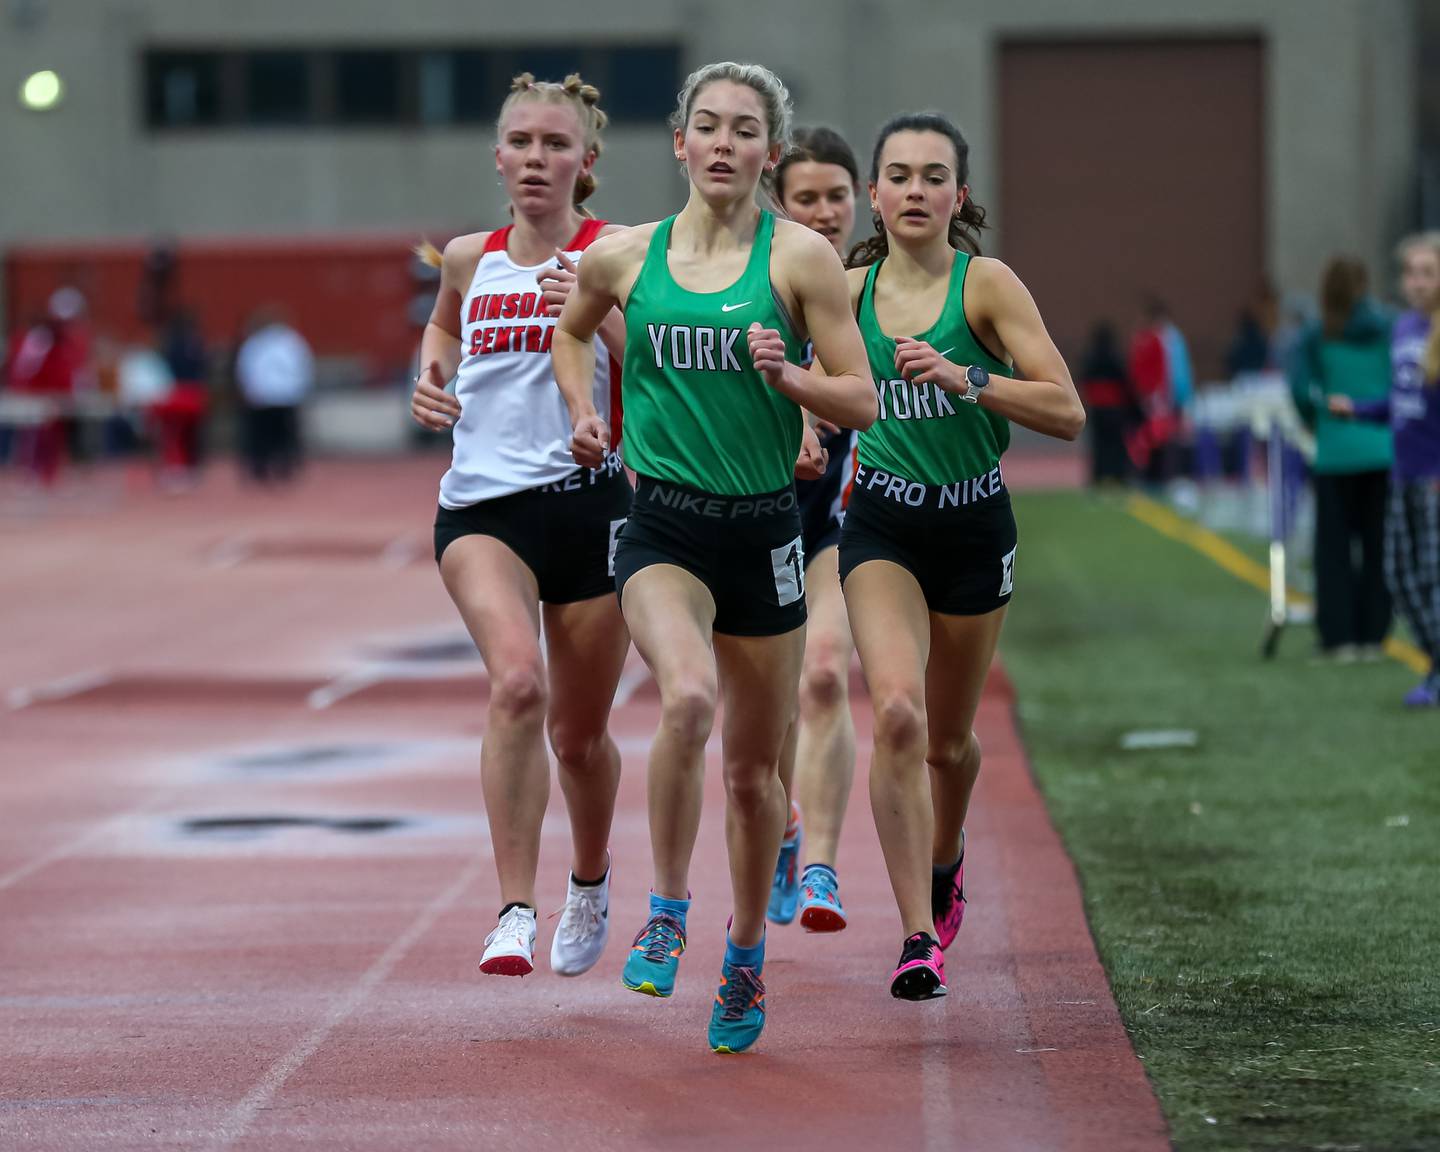 York's Katelyn Winton leads the pack in the 3200 during the West Suburban Silver conference meet at Downers Grove North.  May 6.2022.